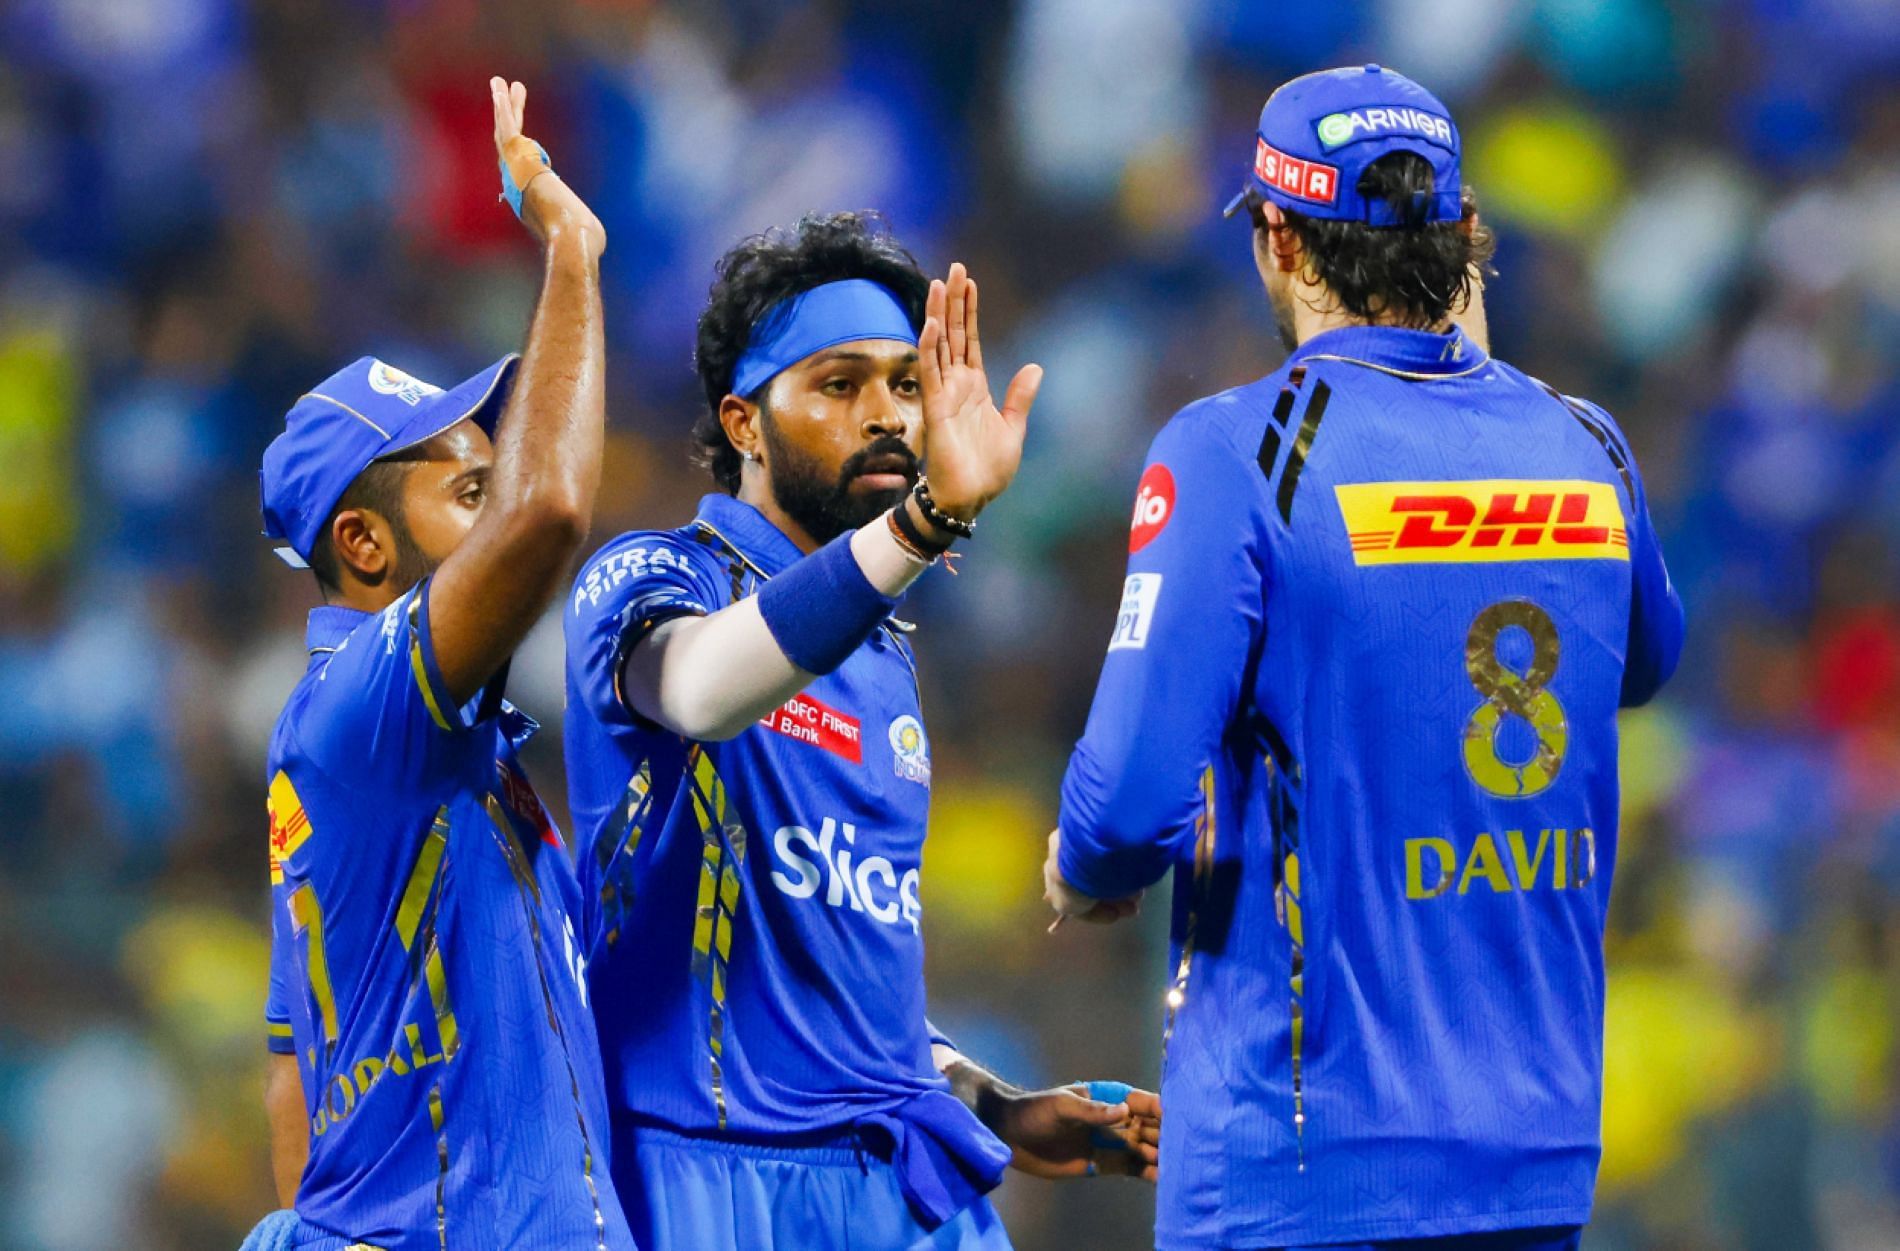 Hardik picked up two crucial wickets against CSK [Credit: MI Twitter handle]